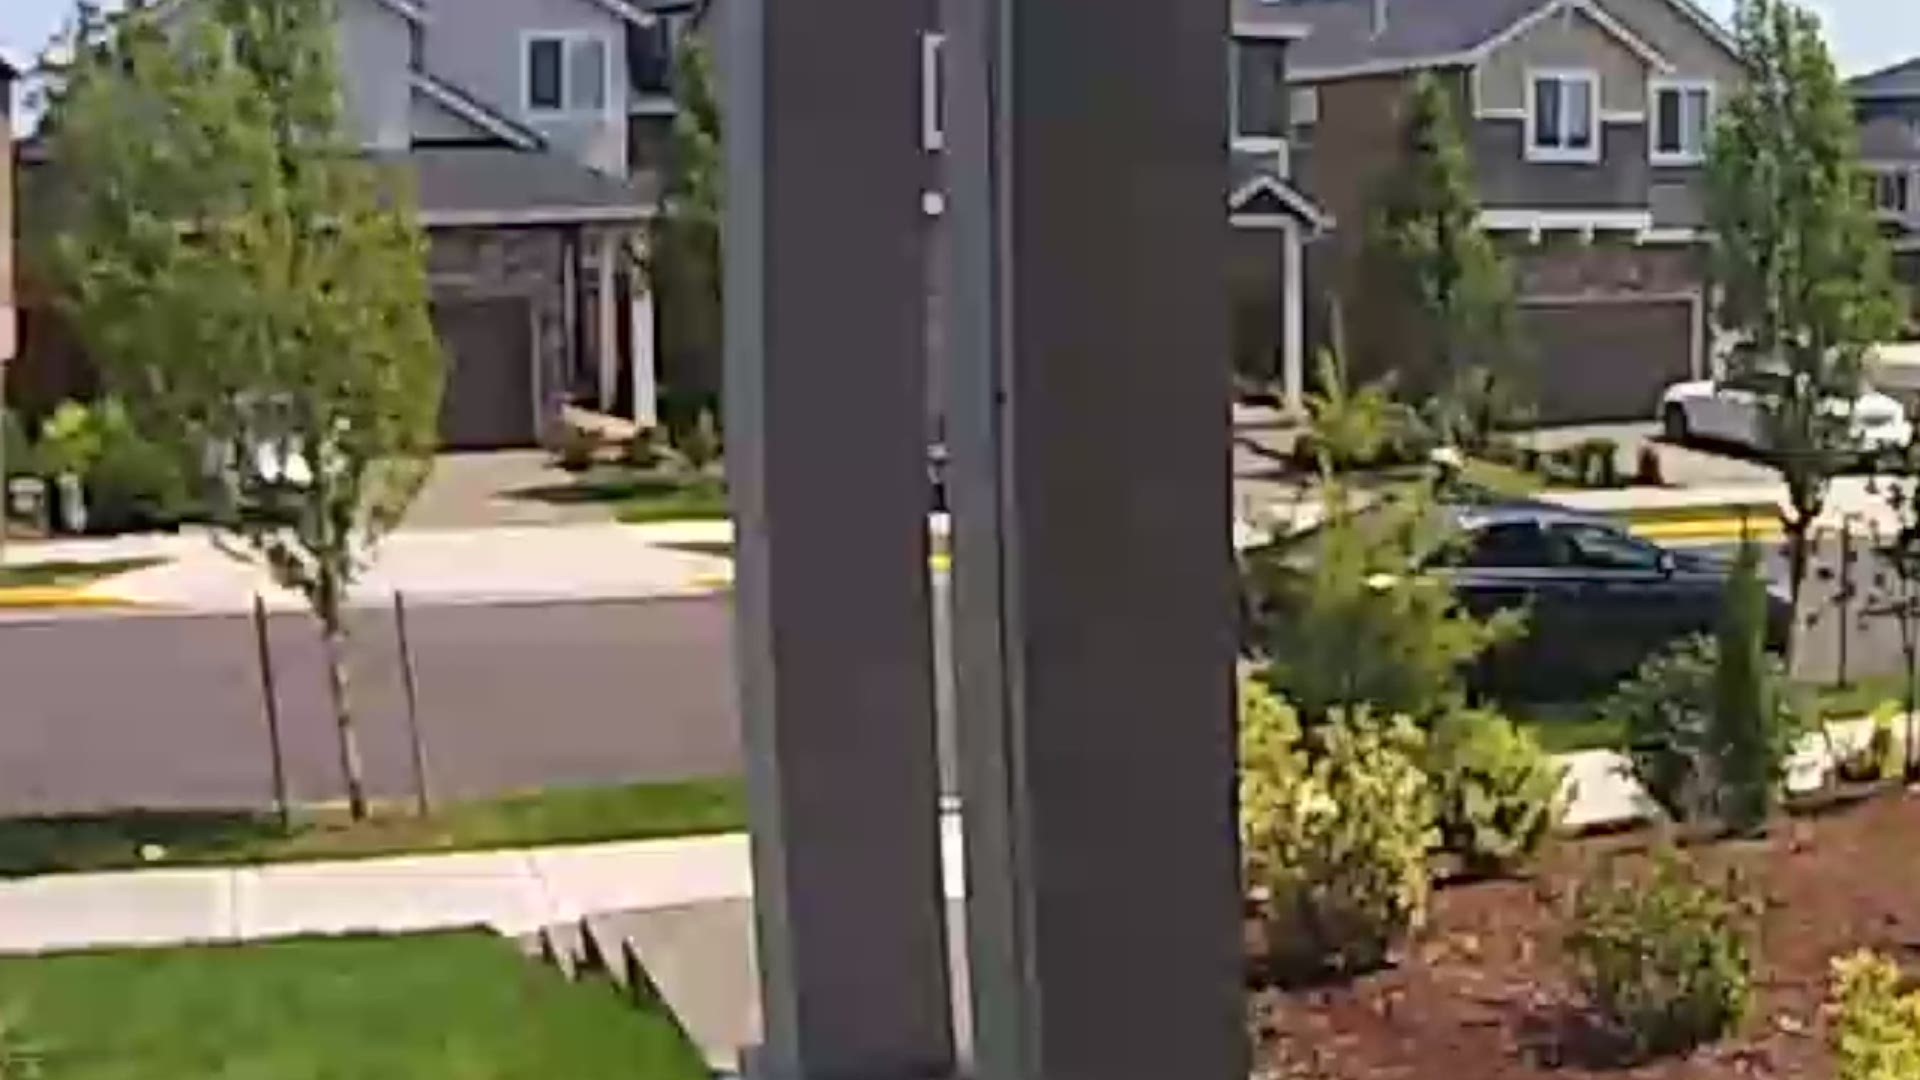 A woman dressed as an FedEx employee steals packages from a home in Happy Valley, Ore.